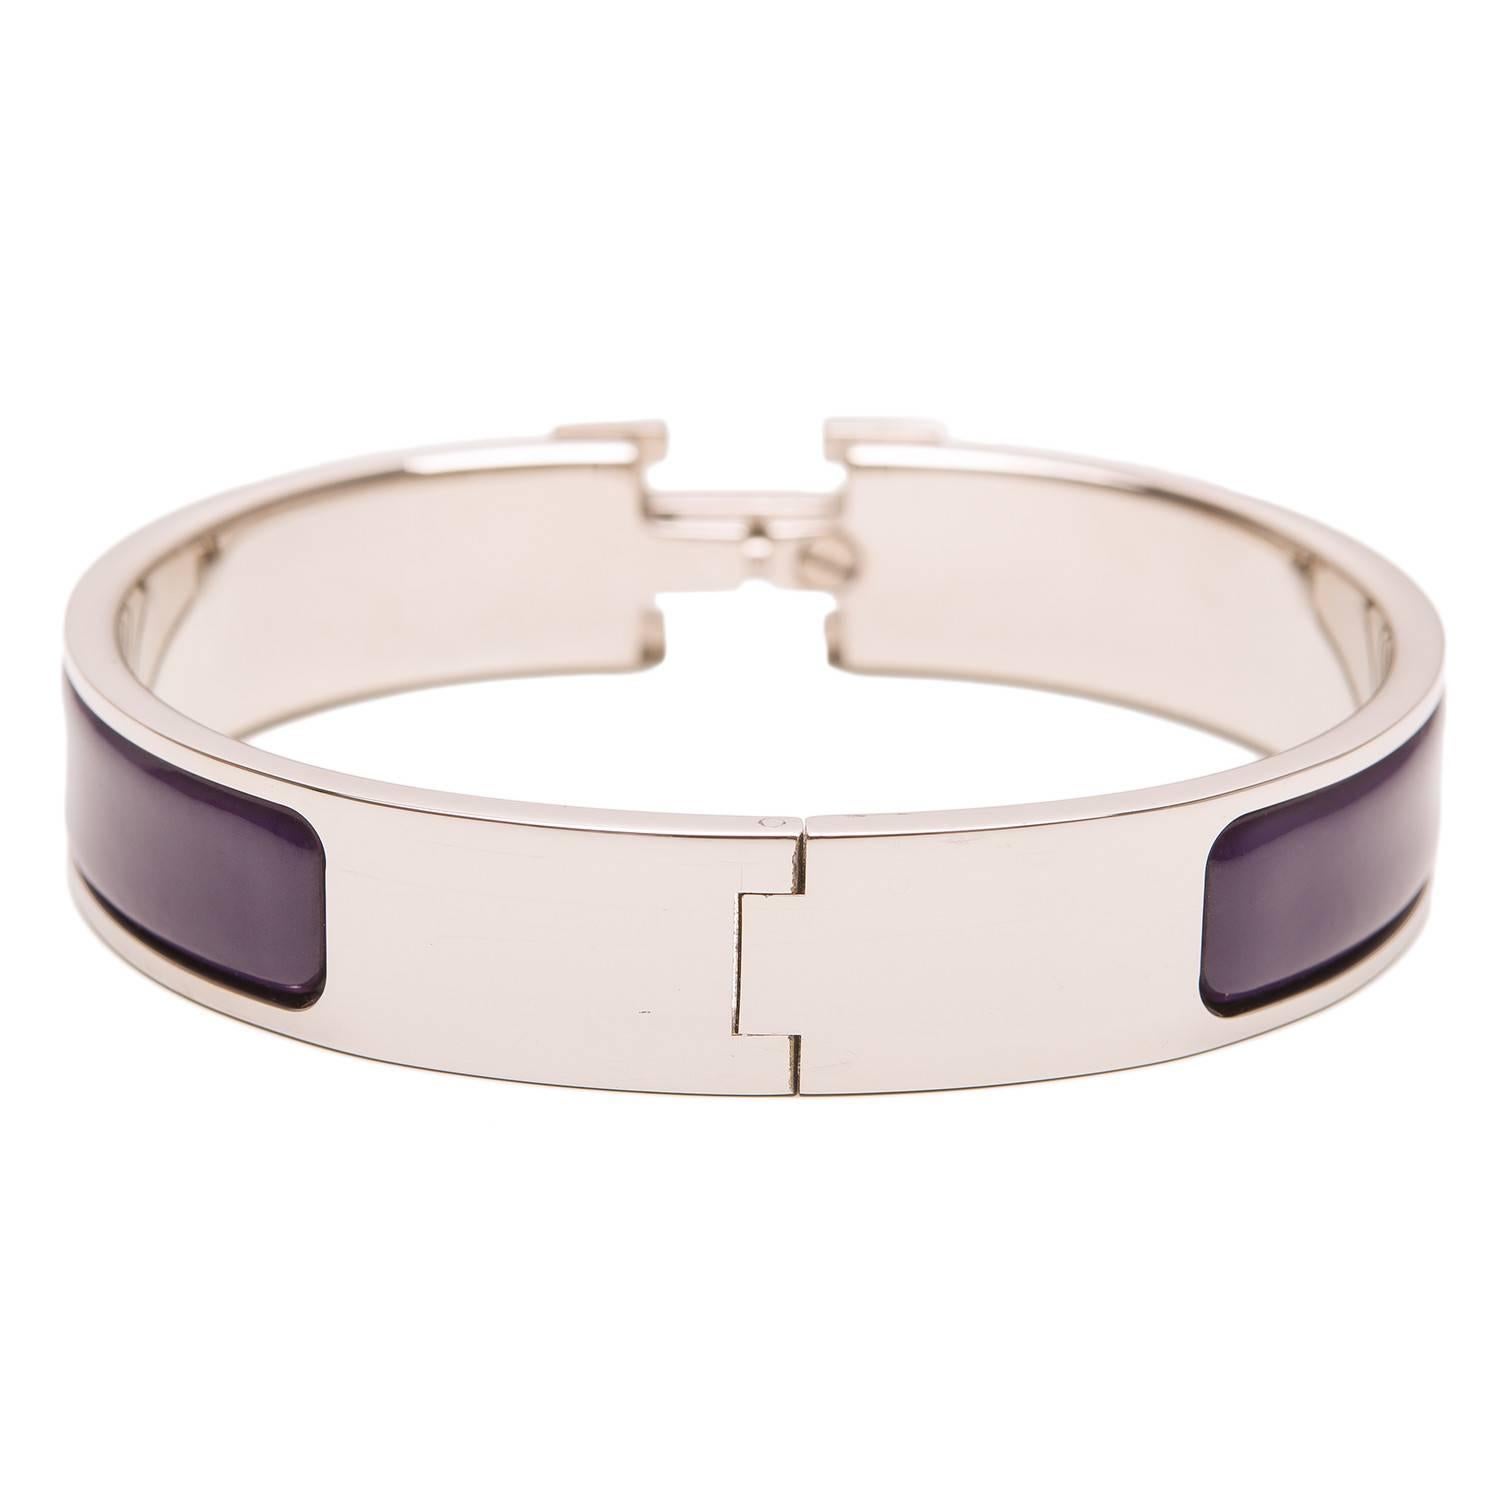 Hermes Prune Clic Clac H Narrow Enamel Bracelet PM In Excellent Condition For Sale In New York, NY